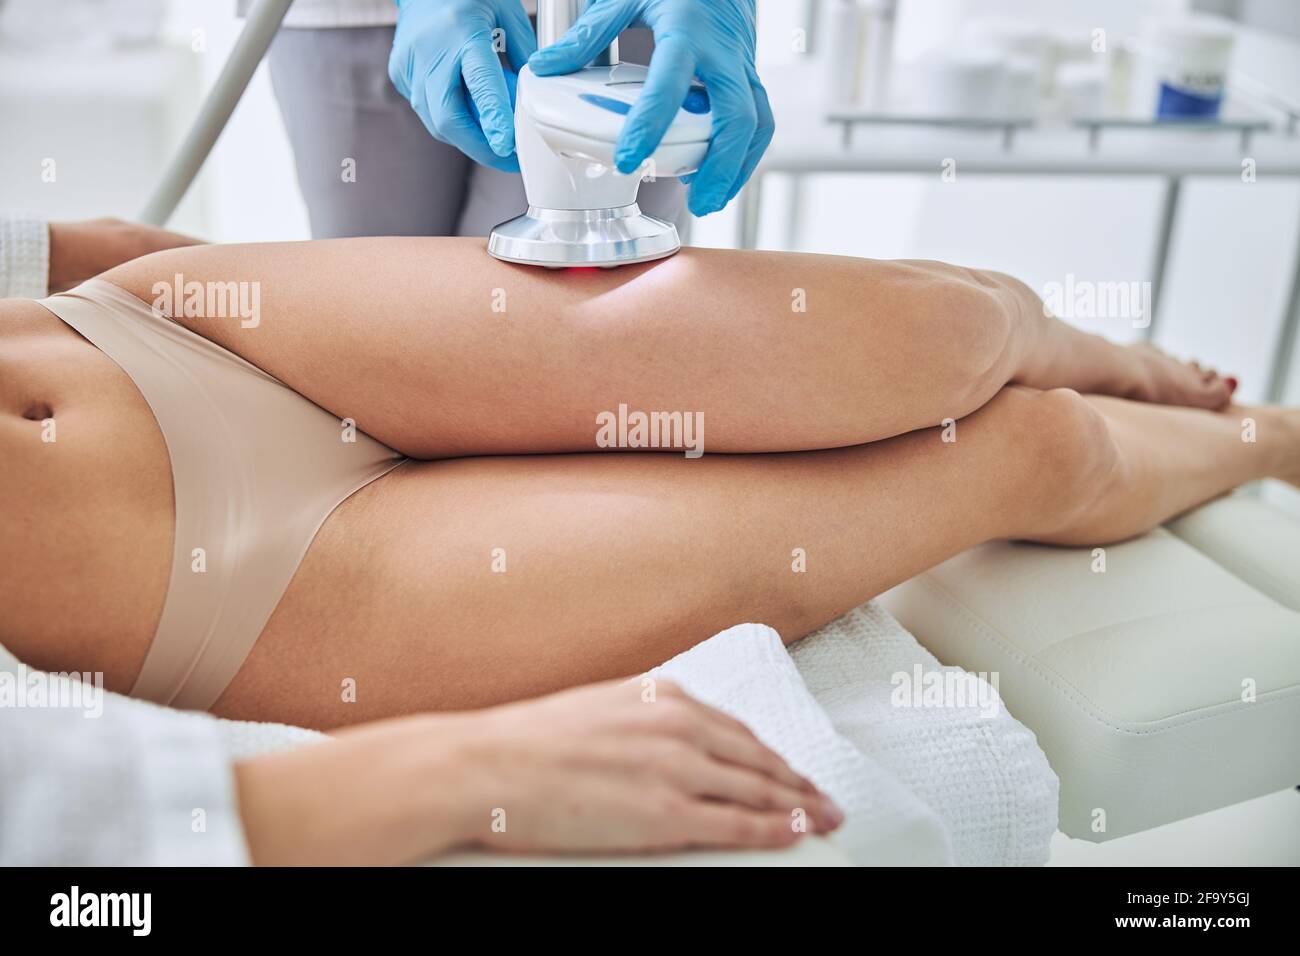 Image of non surgical body sculpting in wellness center Stock Photo